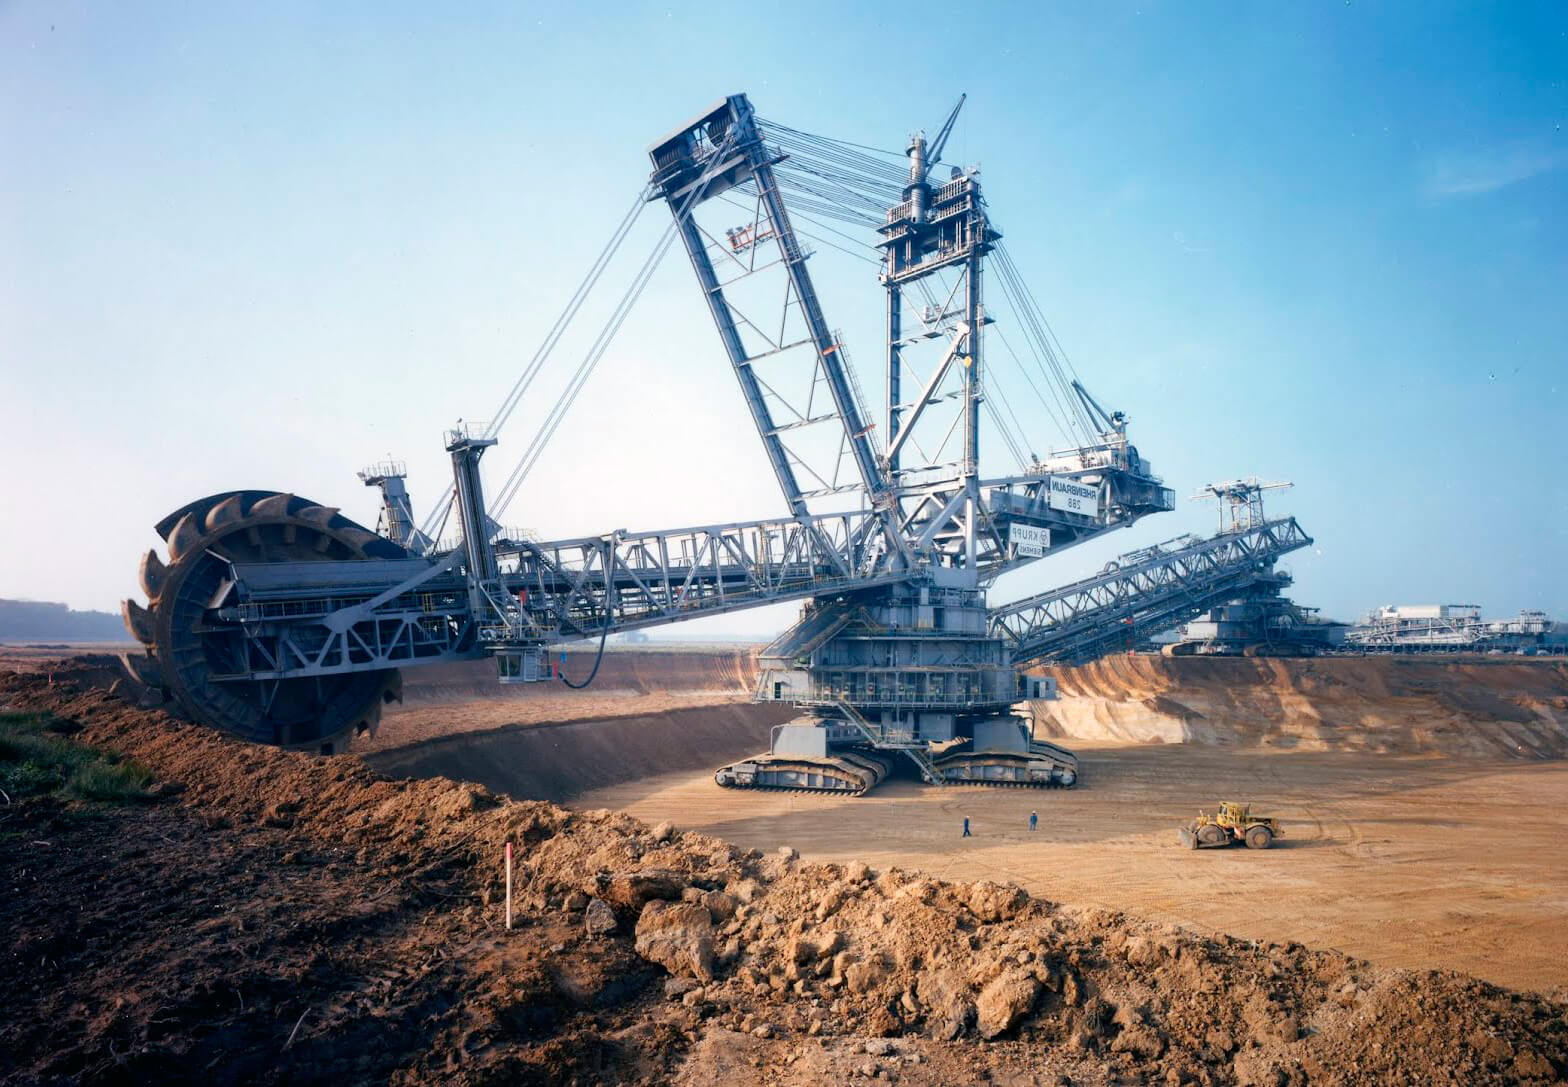 Tuesday&#39;s marvels of engineering: Bagger 288 - Worcon